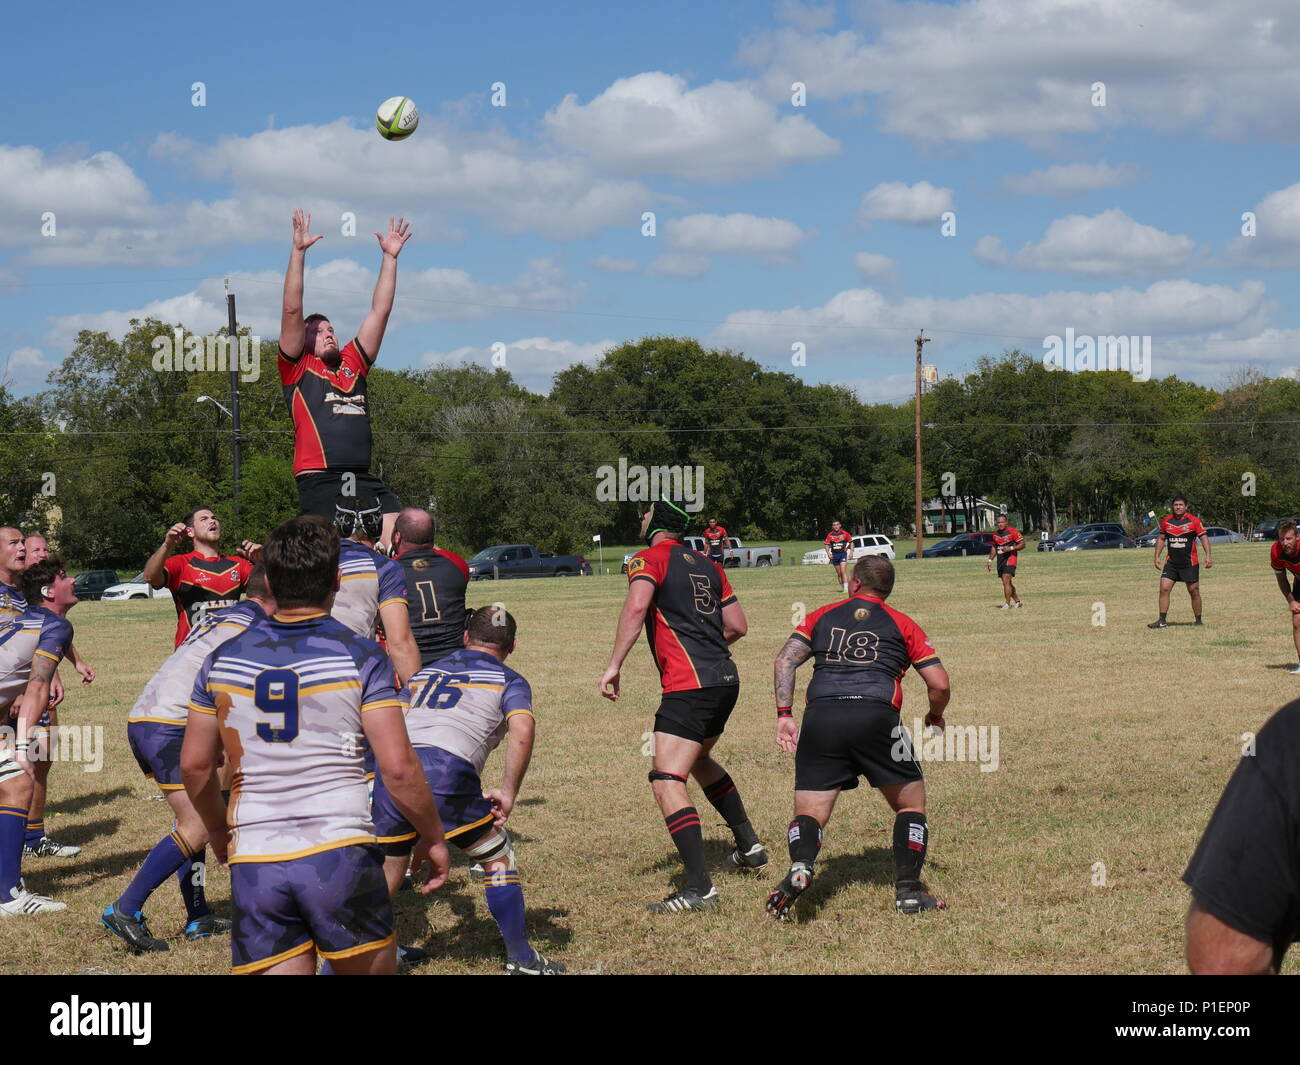 The San Antonio Rugby Football Club, a 45 year old organization formed by doctors from Brooke Army Medical Center in 1971, execute a ‘lineout’ to throw the ball back into play in their match against the British Army Medical Services Rugby Team on October 15, at the Wheatley Sports complex. The visiting British broke open a close match in the second half and won 45-10. (U.S. Army photo by Robert A. Whetstone/Released) Stock Photo